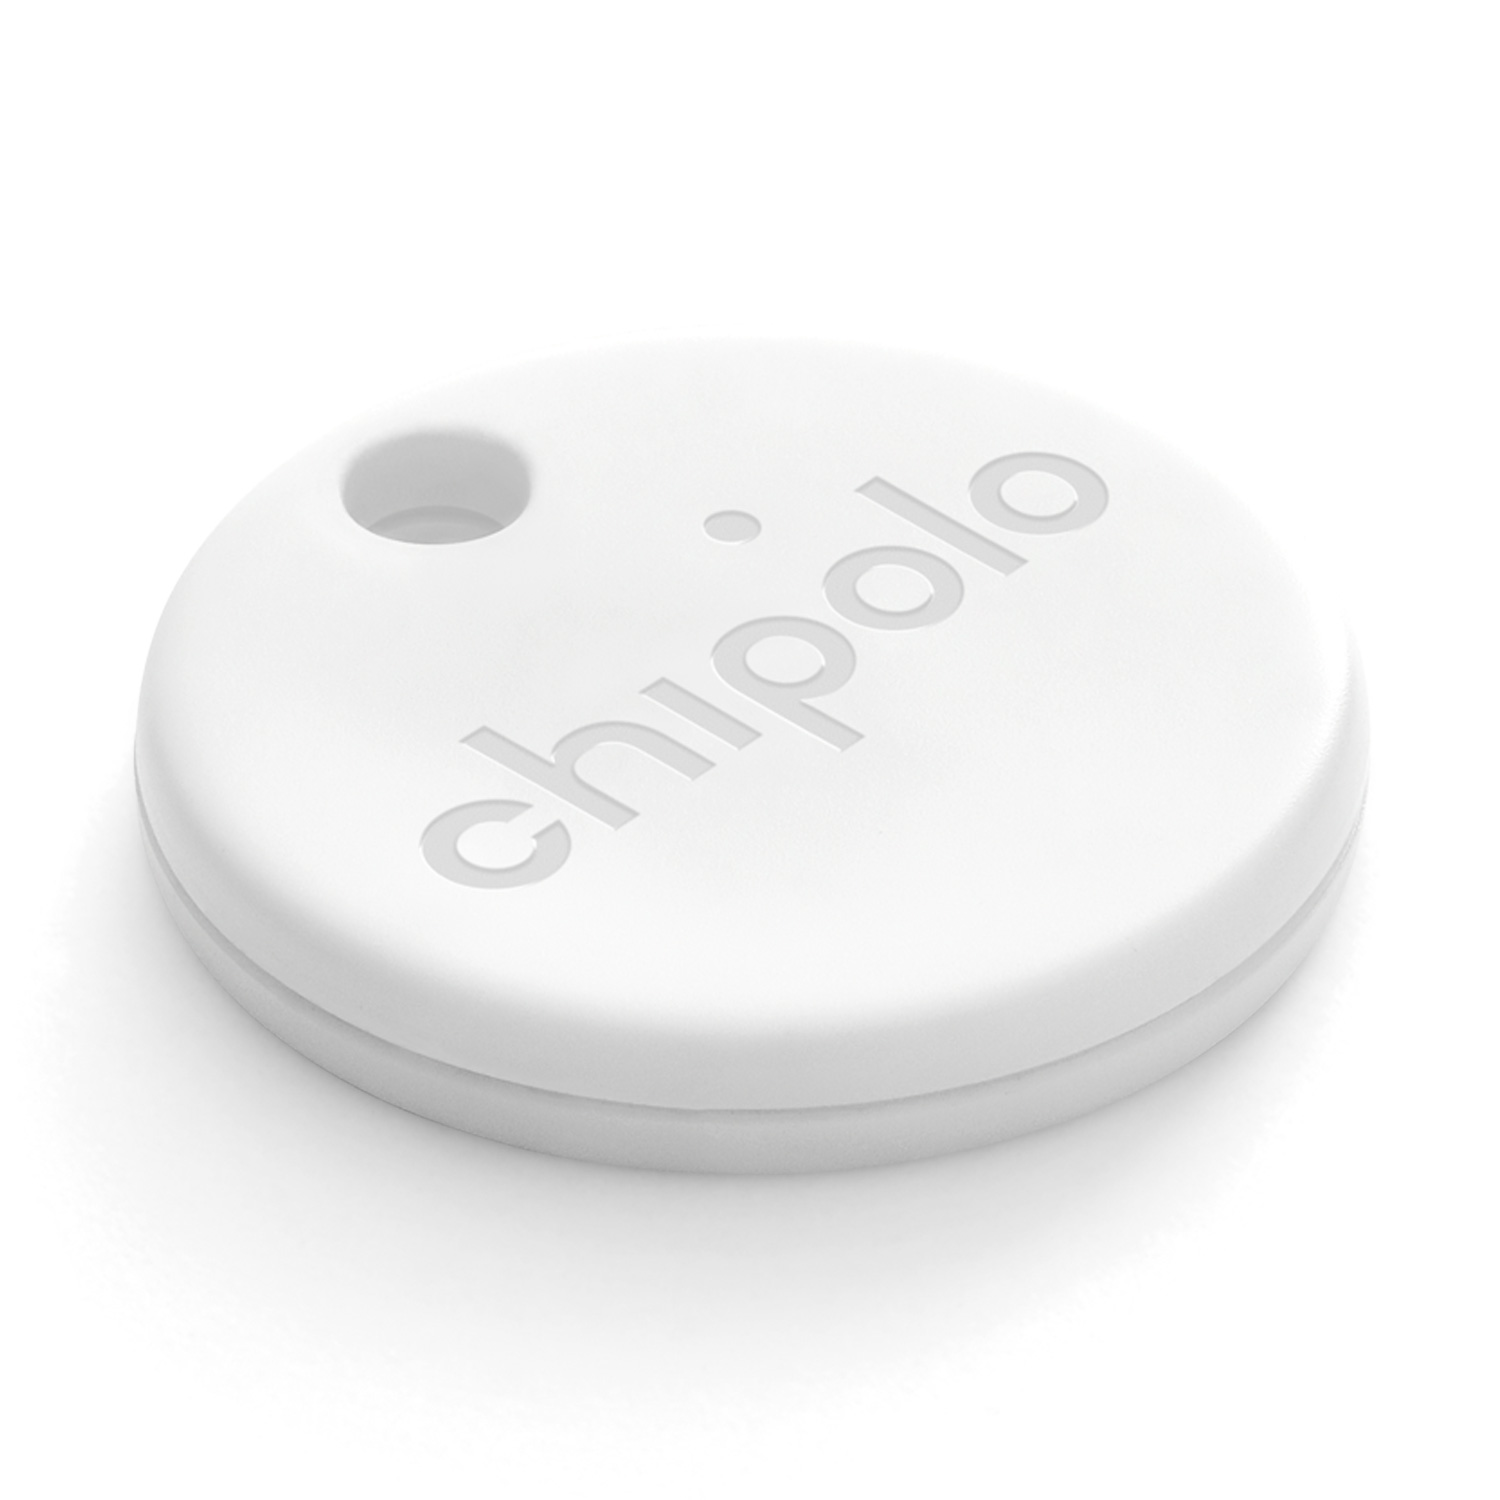 Chipolo ONE - Bluetooth Tracker - white